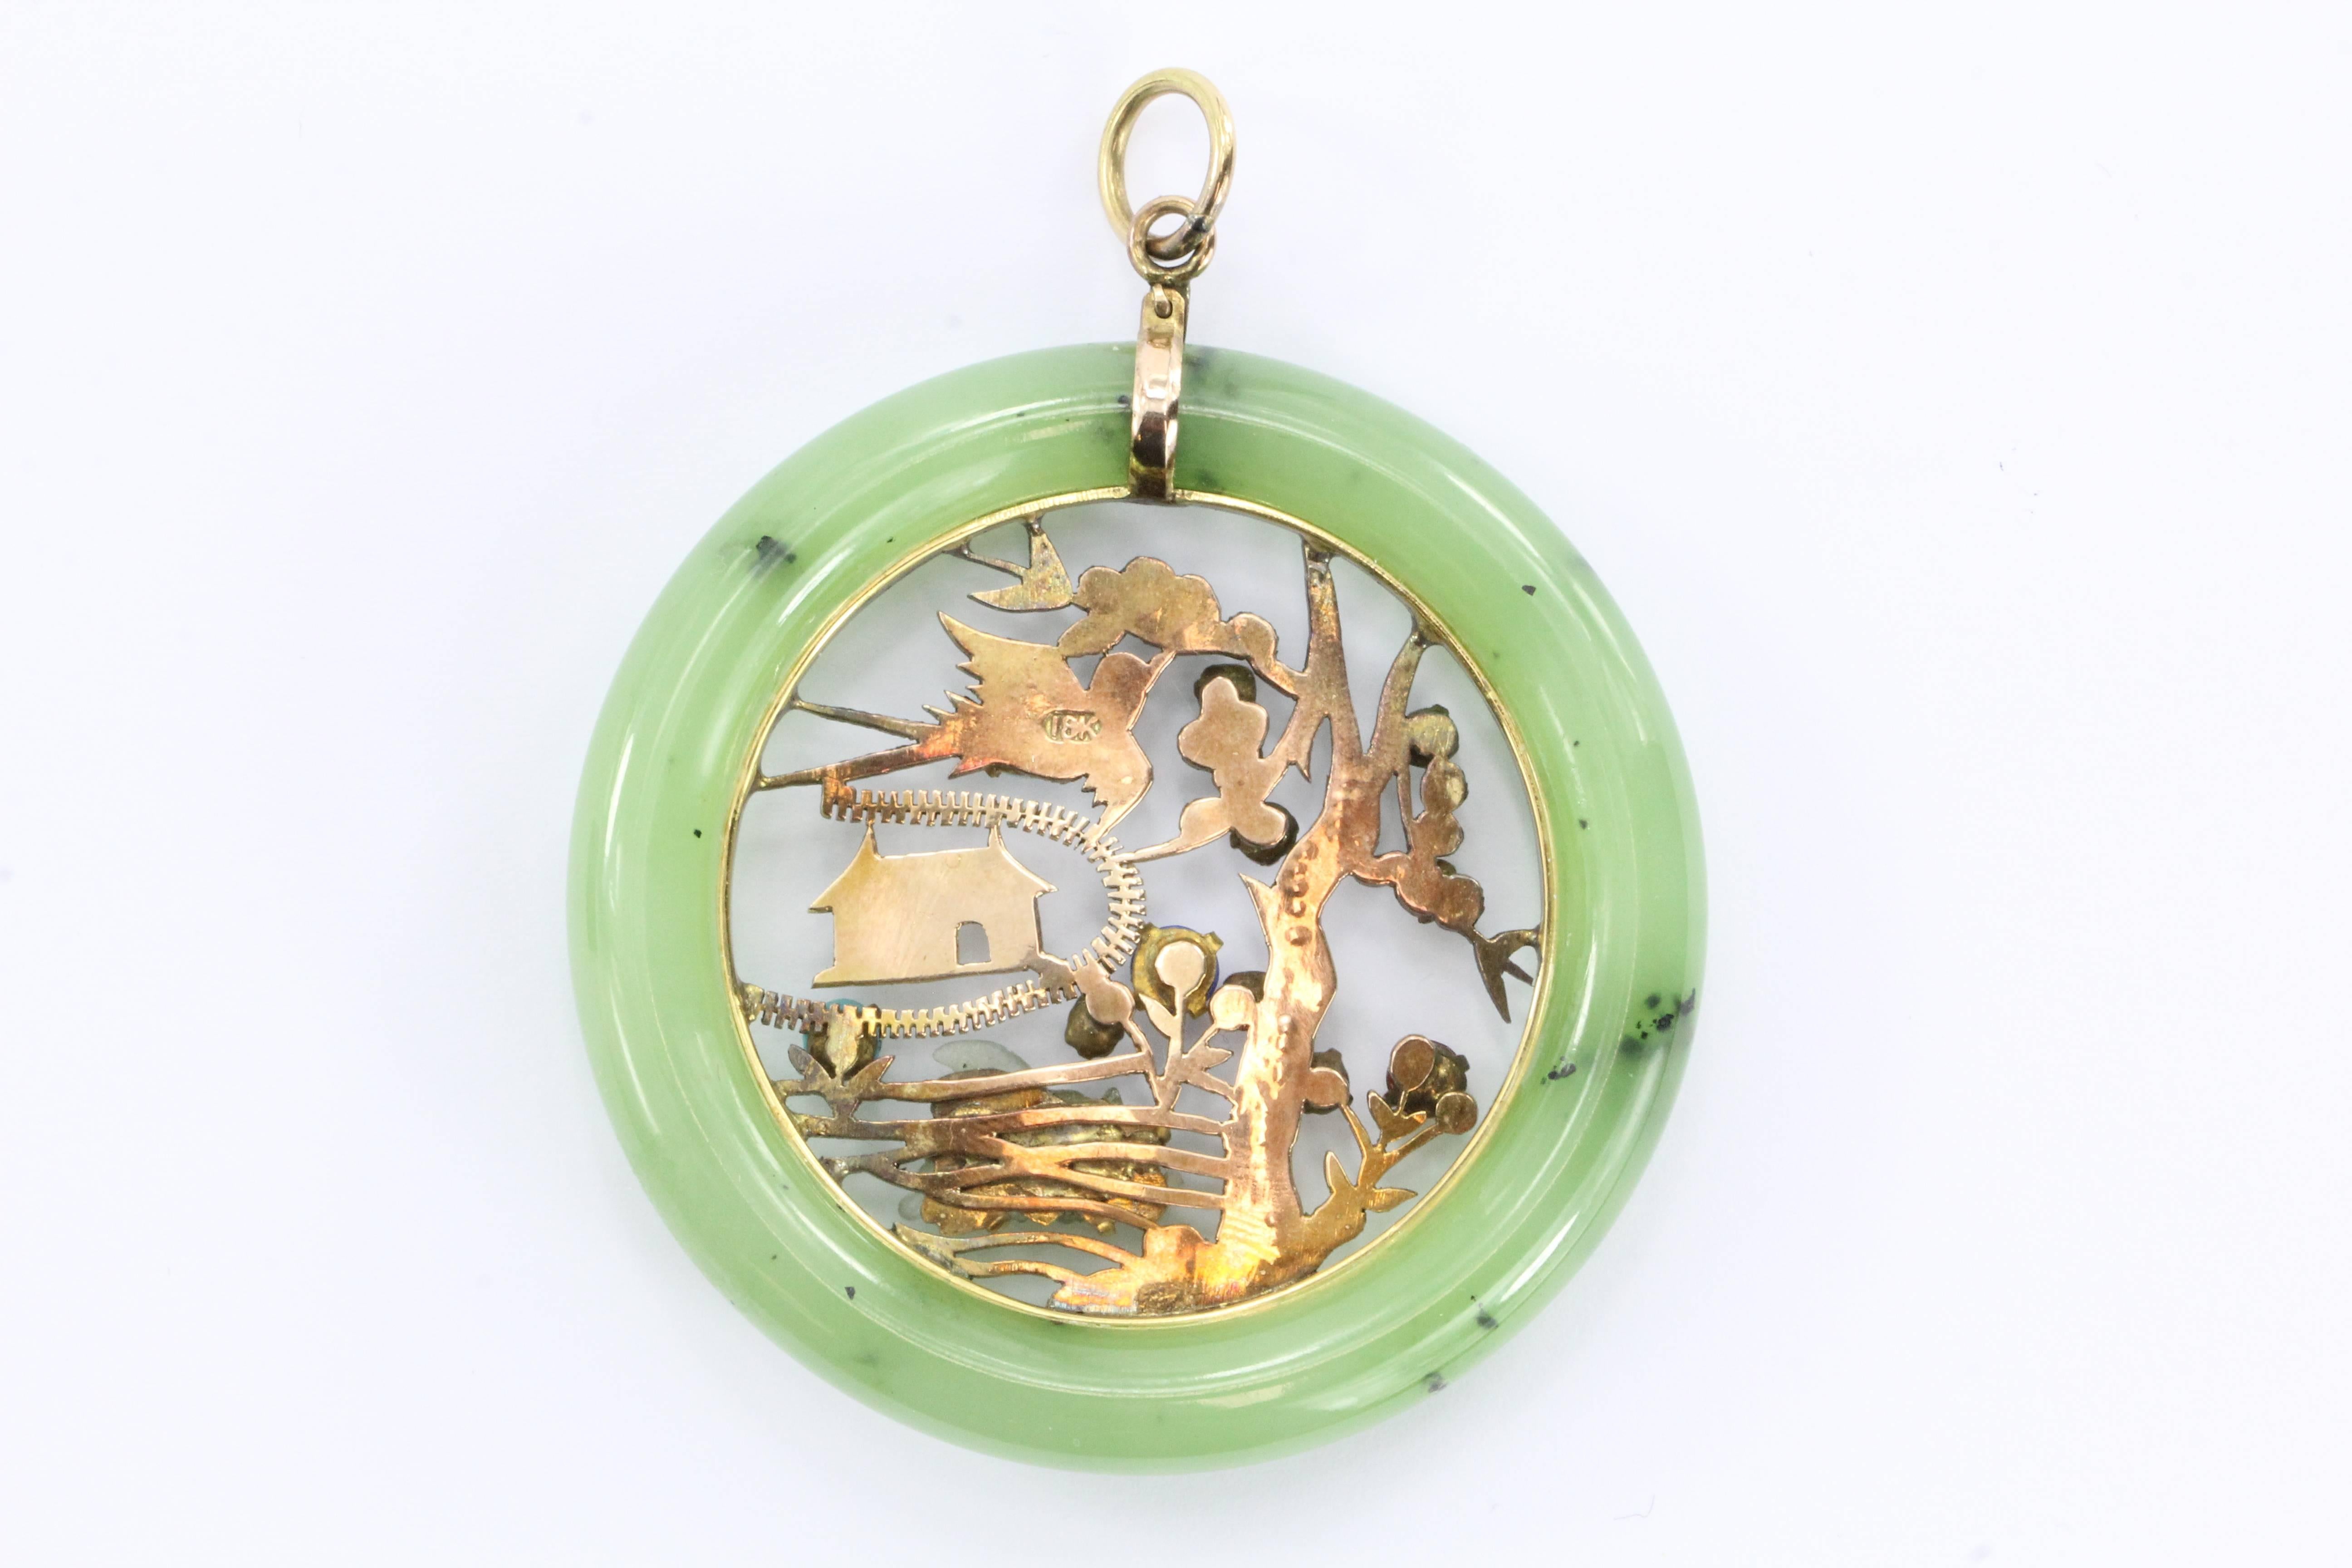 Vintage 18K Gold Chinese Amulet / Pendant w/ Jade, Ruby, Opal, Turquoise etc. The piece is in excellent estate condition and ready to wear. It is hallmarked 18K on the back. The piece was custom made and depicts a small pagoda, a carved jadeite jade